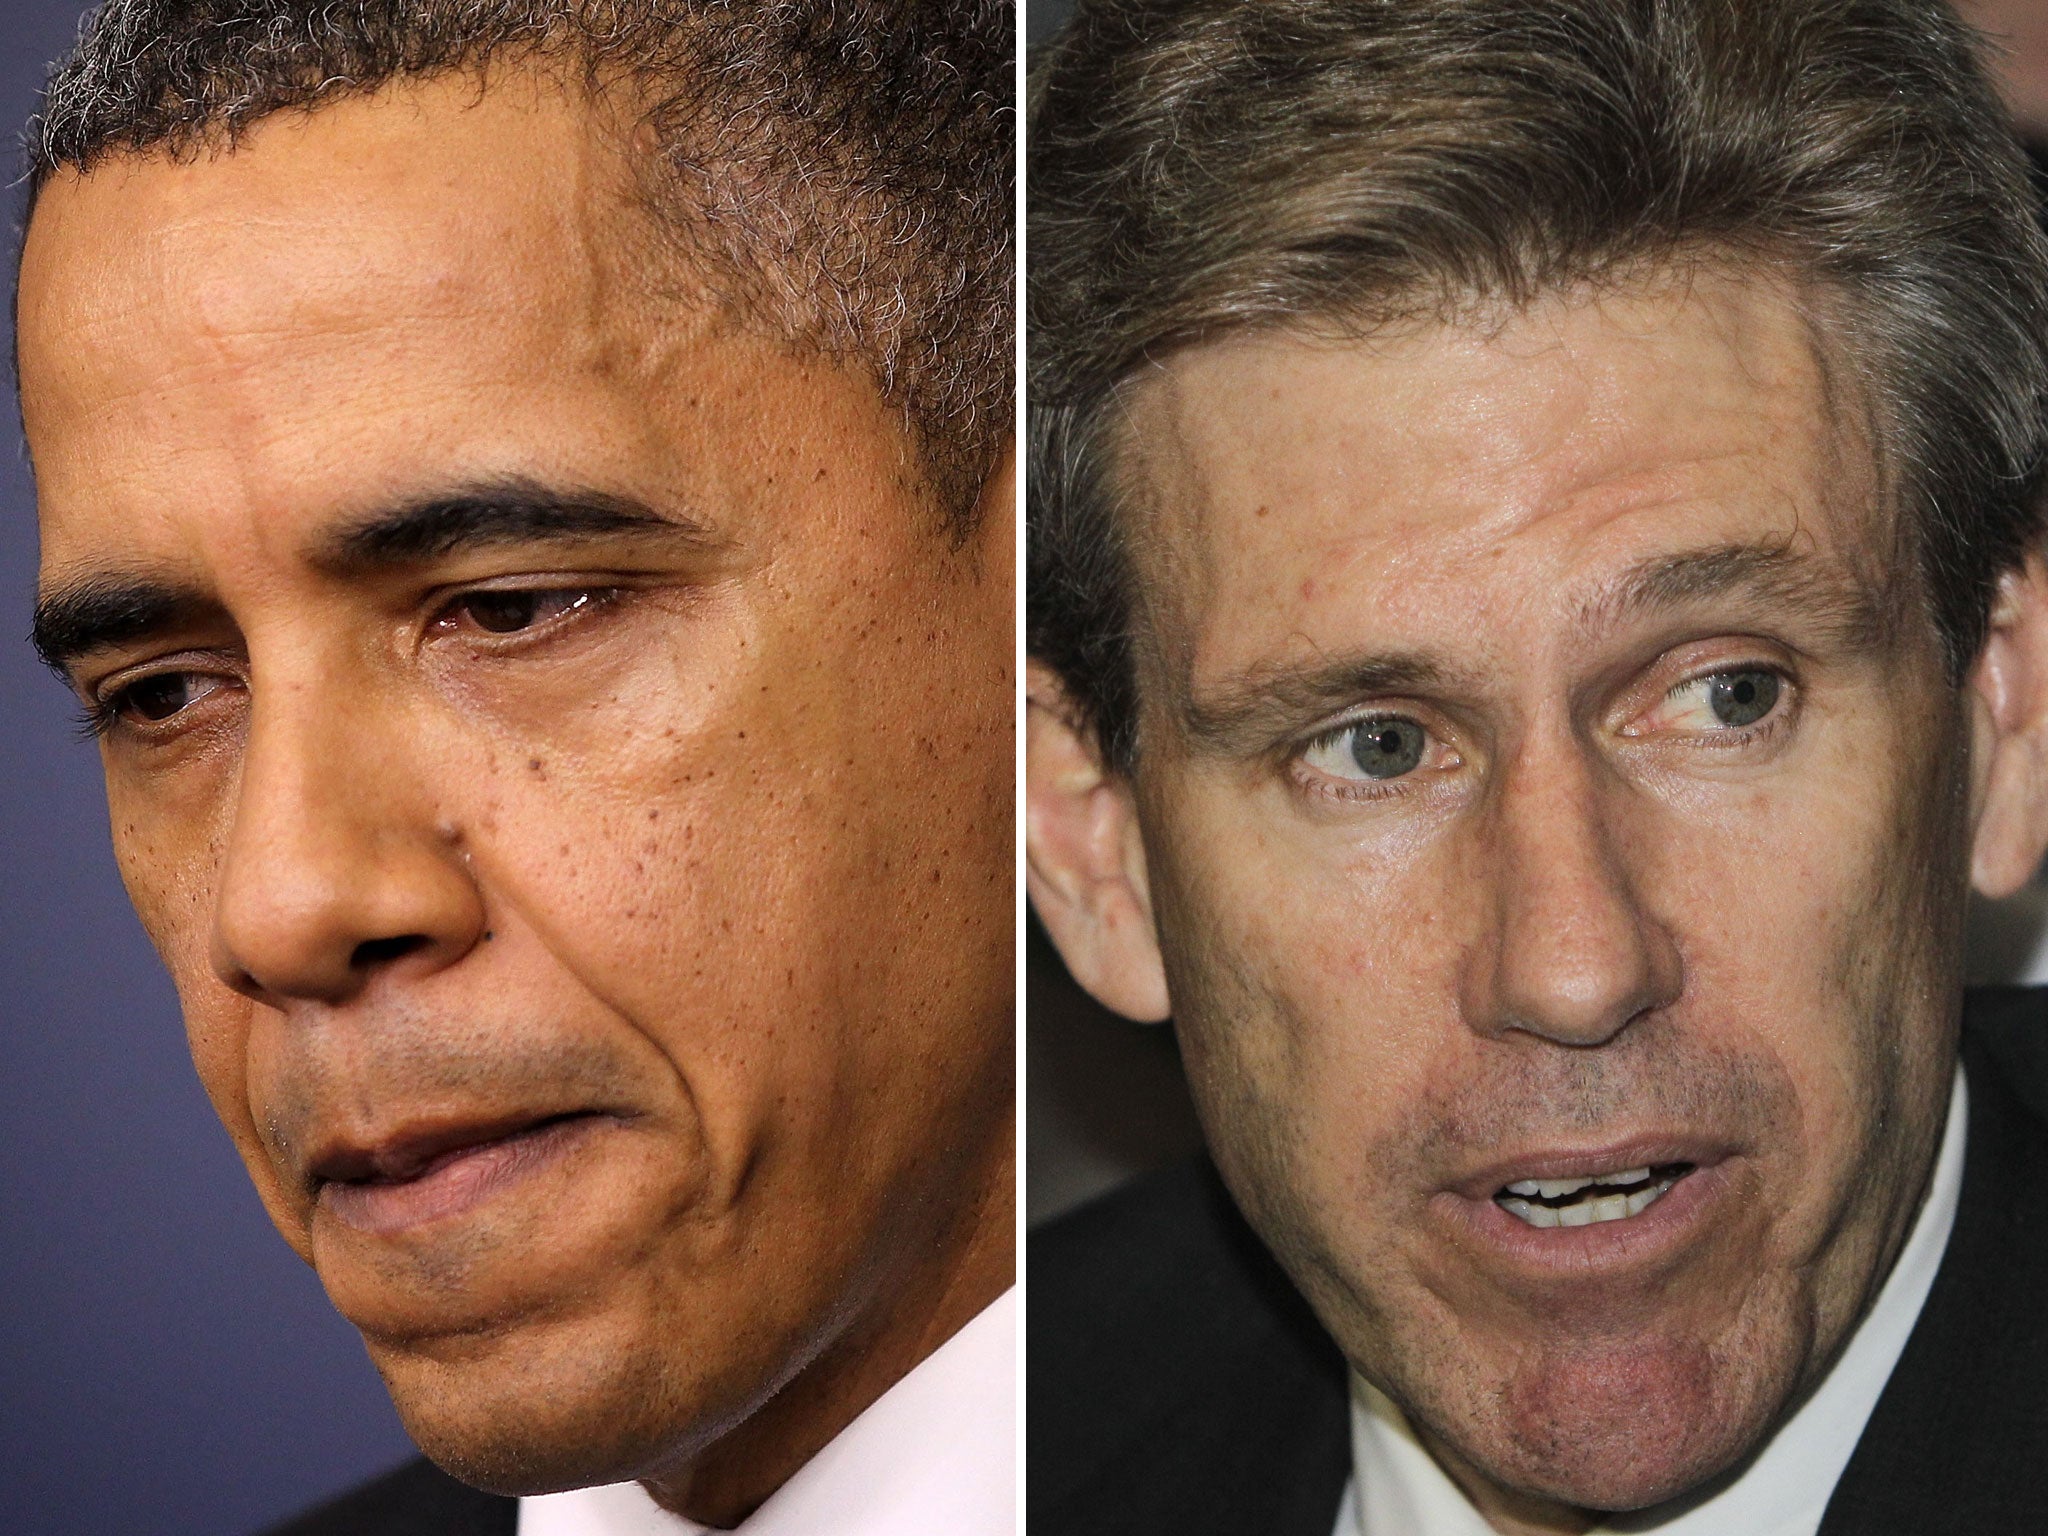 The Obama administration has been blamed for the blunders that led to the death of the US Ambassador to Libya, Chris Stevens (right), in Benghazi earlier this year